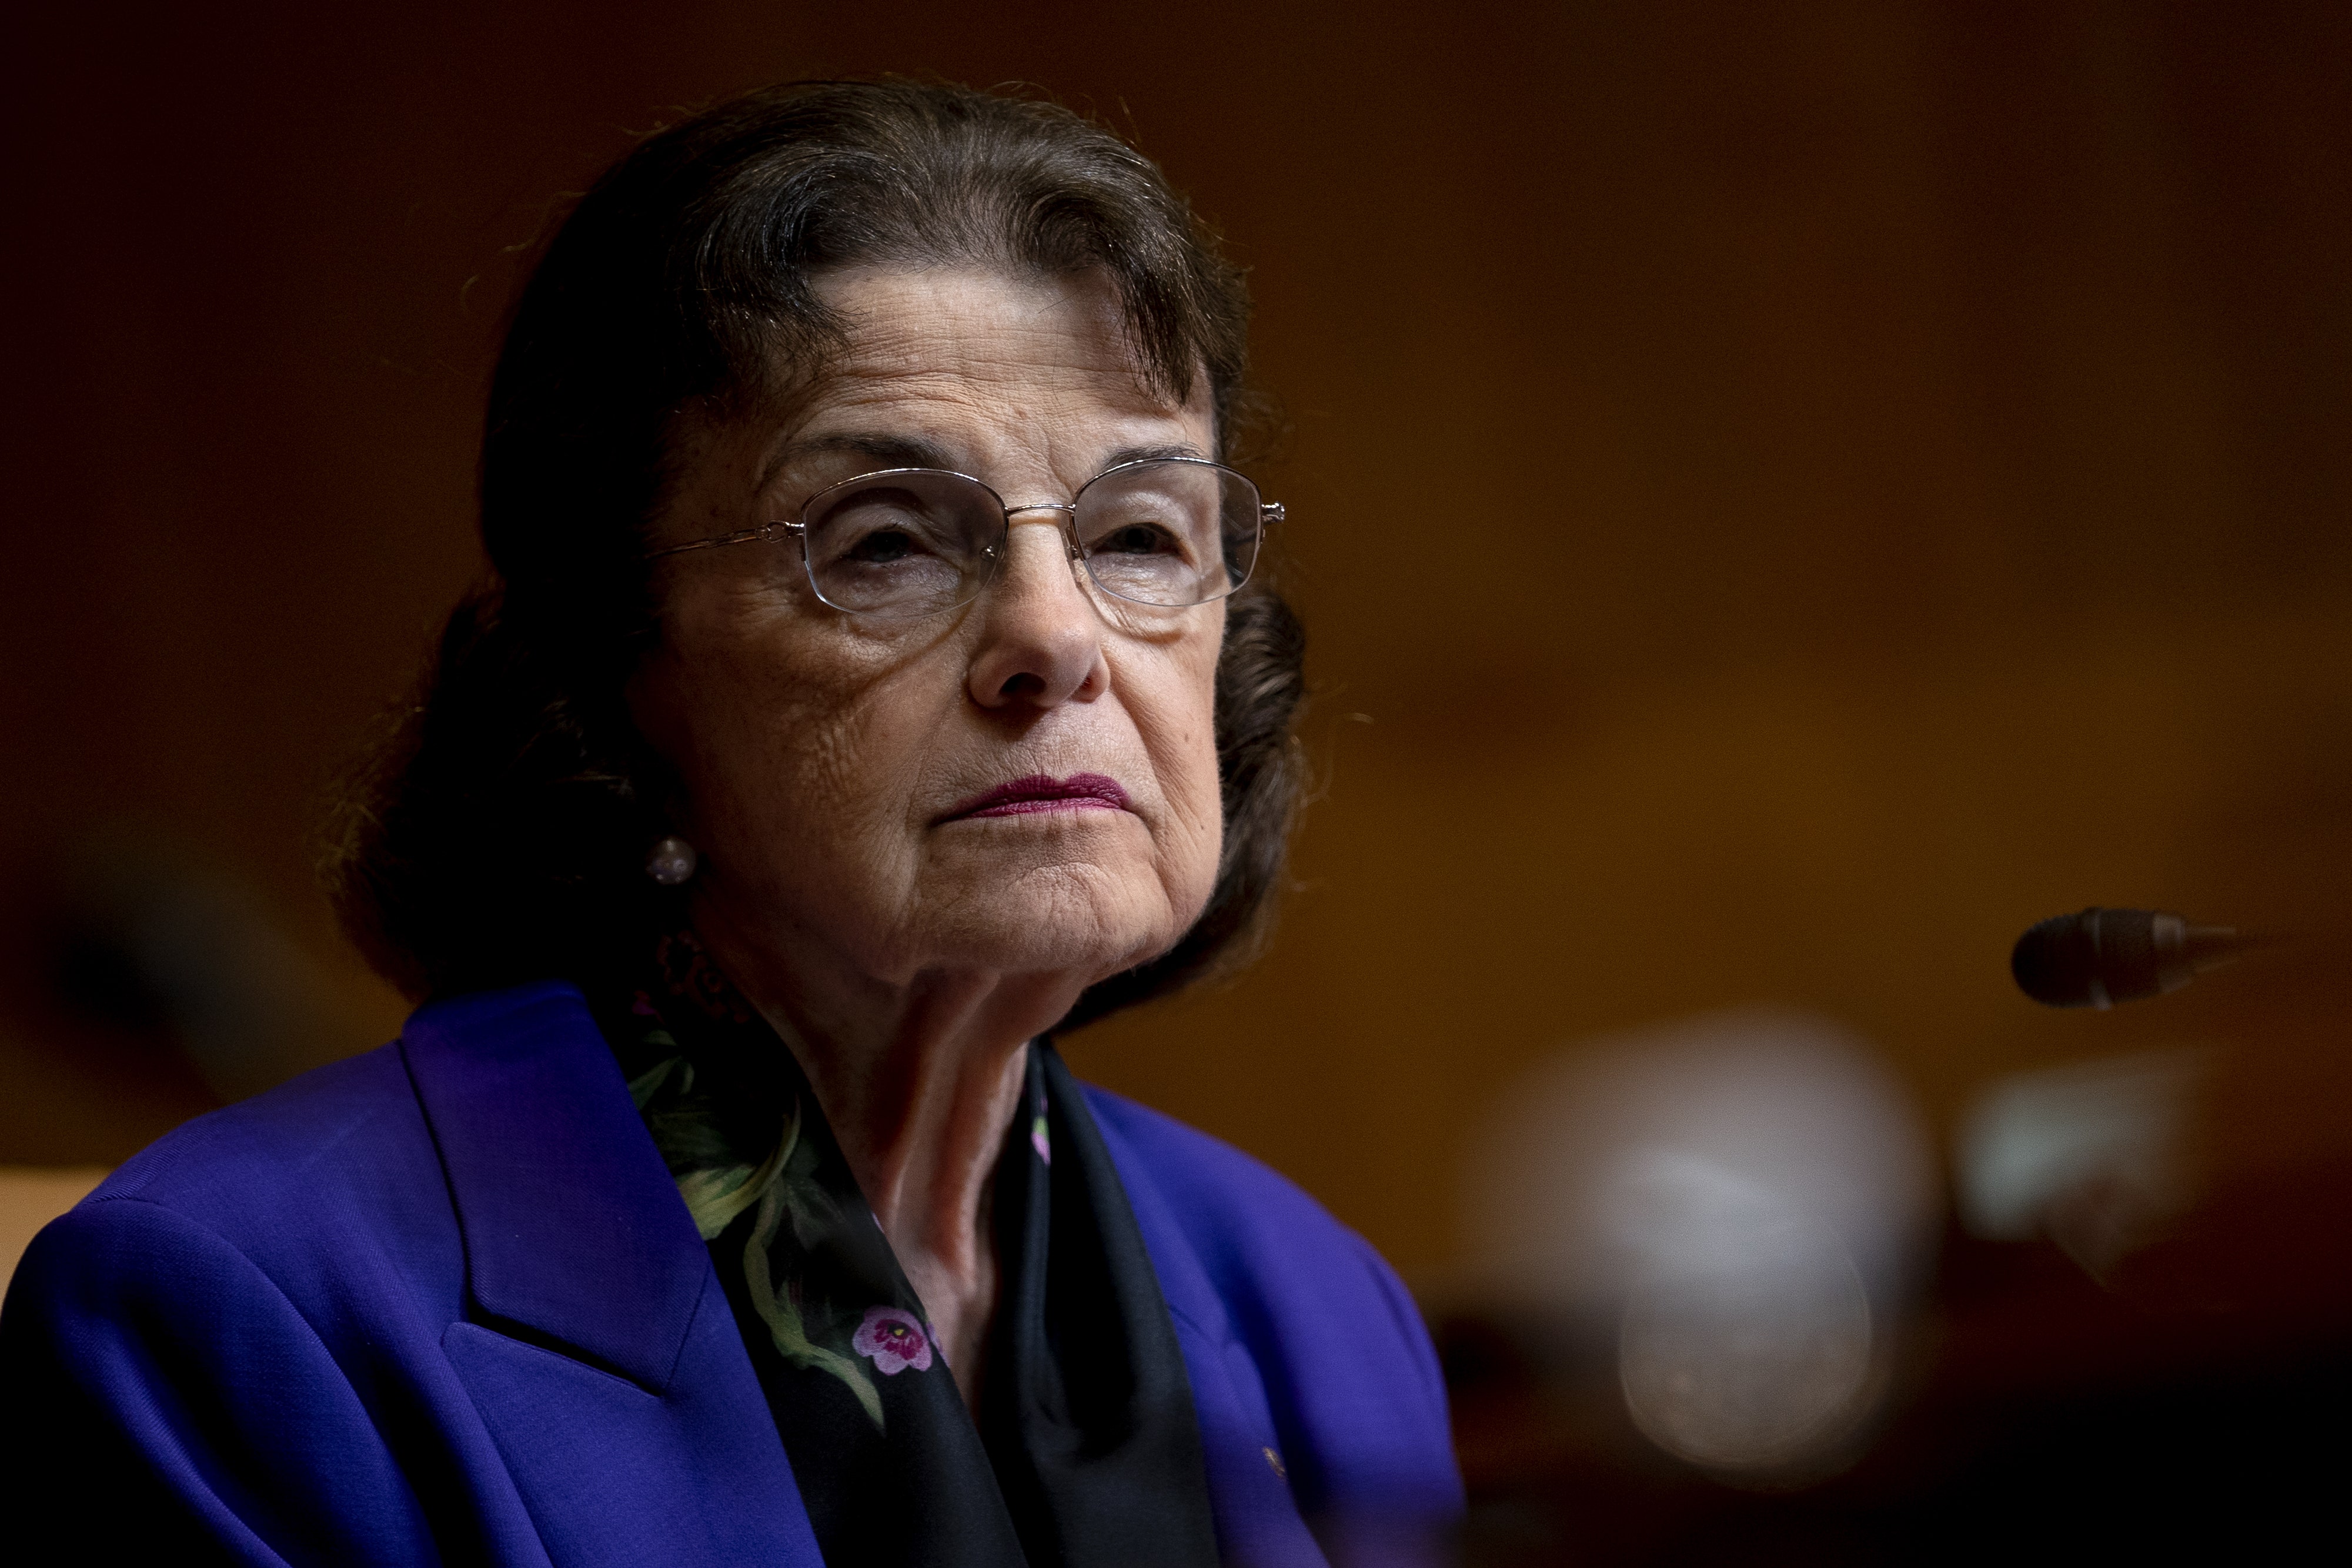 Fellow Democrats turn on Dianne Feinstein, call for her to resign from Senate: 'dereliction of duty'